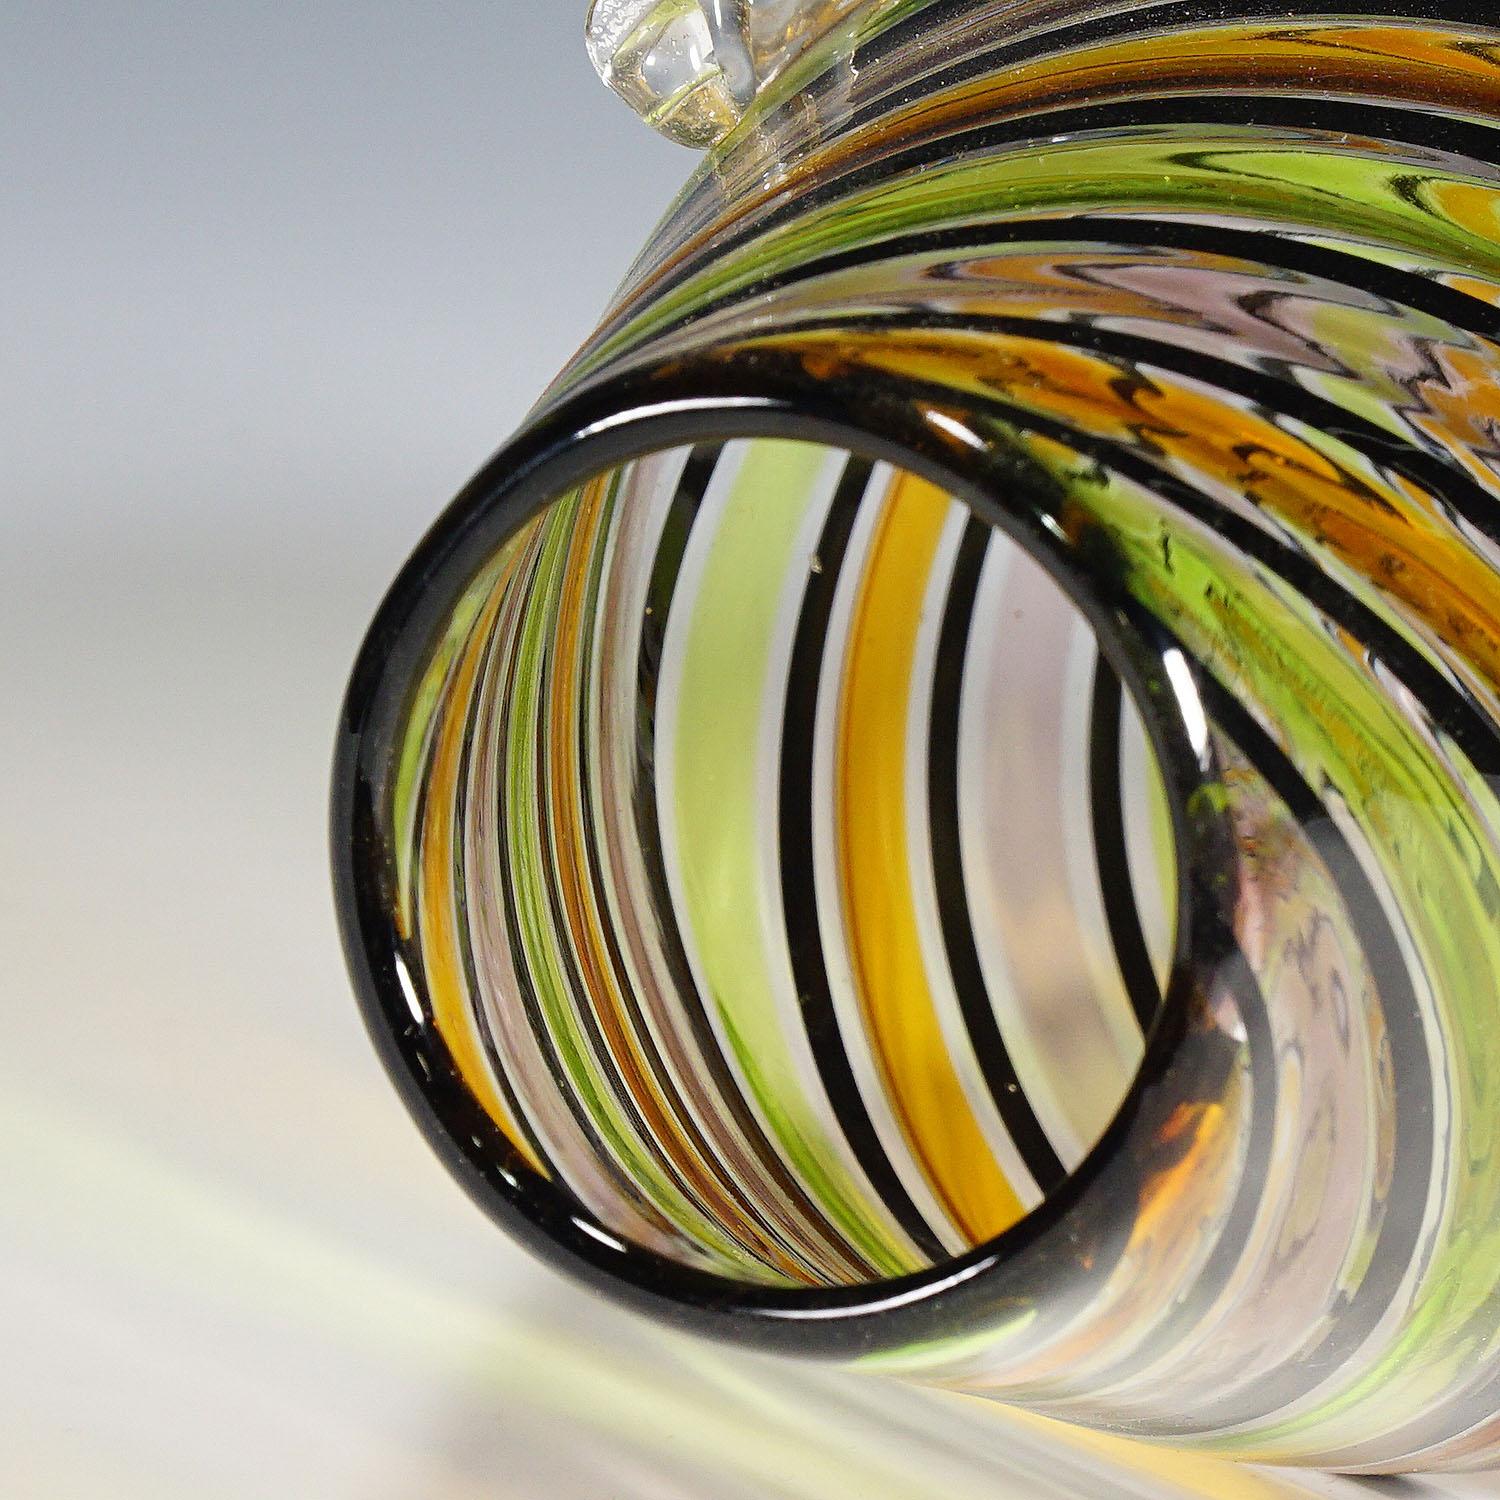 Art Glass Fratelli Toso 'a canne' Glass Vase with Handles, Murano, Italy, ca. 1965 For Sale